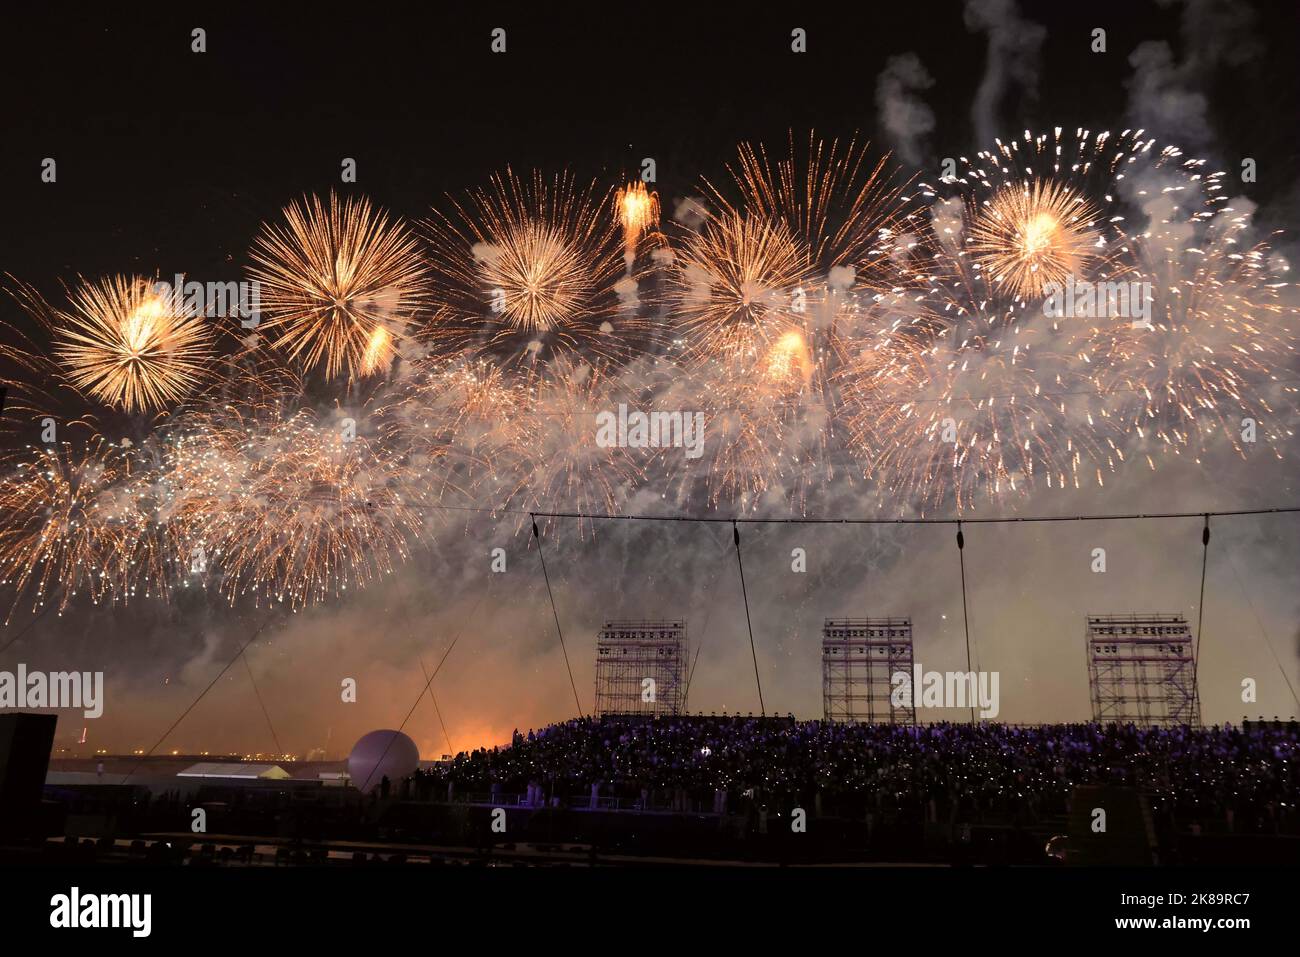 Riyadh, Saudi Arabia. 21st Oct, 2022. Fireworks are seen during the opening ceremony of Riyadh Season 2022 in Riyadh, Saudi Arabia, Oct. 21, 2022. Saudi Arabia's Riyadh Season 2022 started in its capital on Friday with a grand opening ceremony. Under the slogan 'Beyond Imagination,' this year marks the third edition of the Riyadh Season, one of the initiatives taken by Saudi Arabia to boost economic and tourist activity. Credit: Wang Haizhou/Xinhua/Alamy Live News Stock Photo